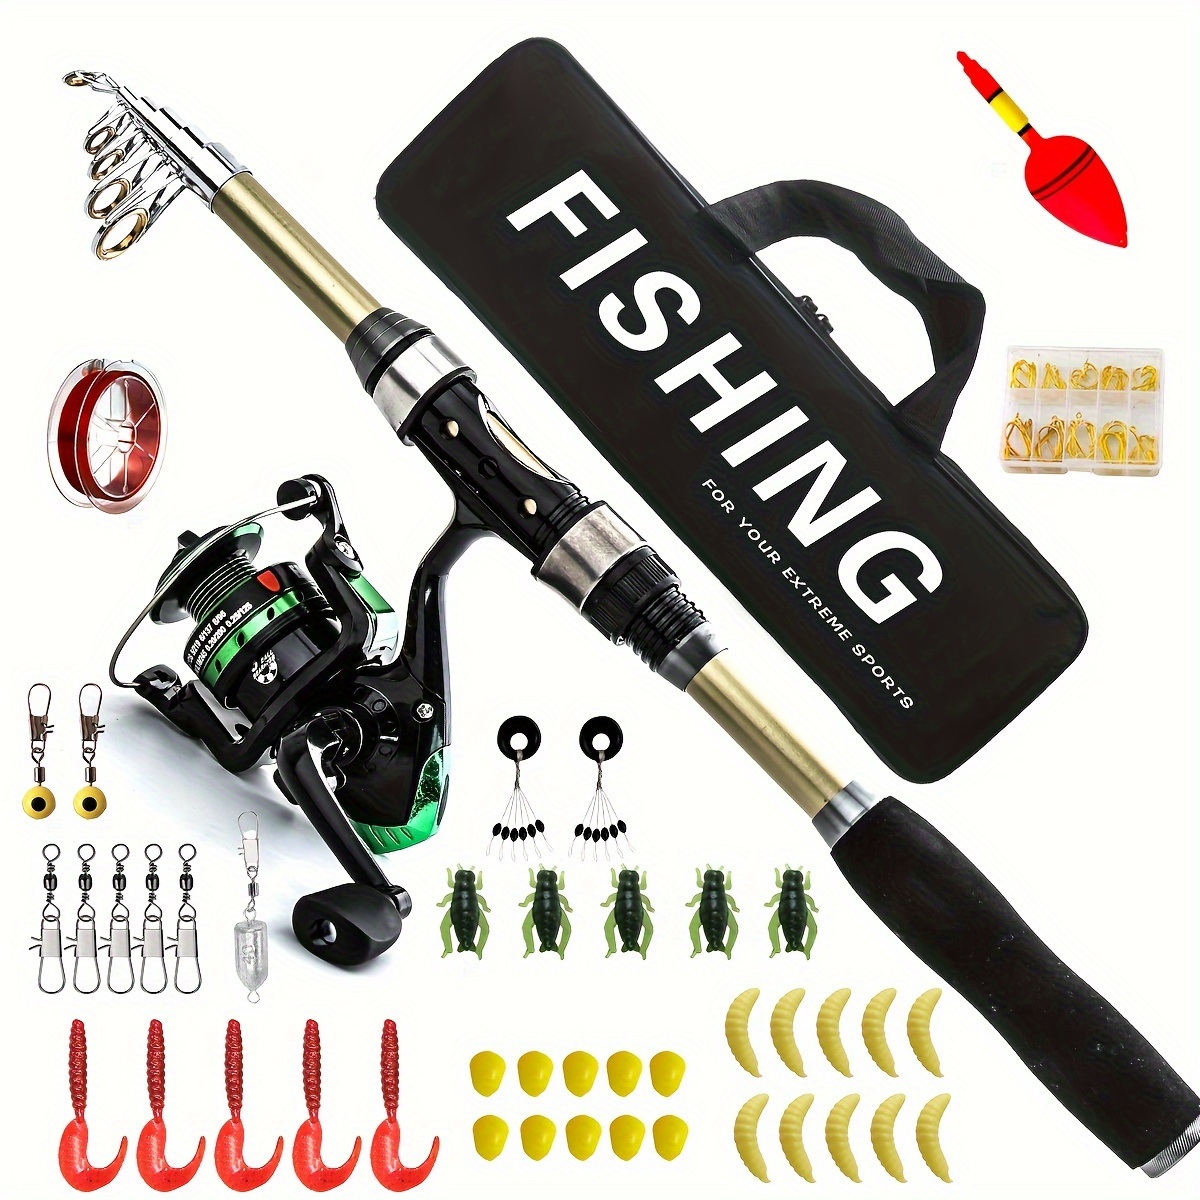 1 Set 70.87inch Fishing Rod And Reel Combo, Telescopic Fishing Rod, 39.68LB  Max Drag Fishing Reel, Fishing Tackle For Saltwater Freshwater